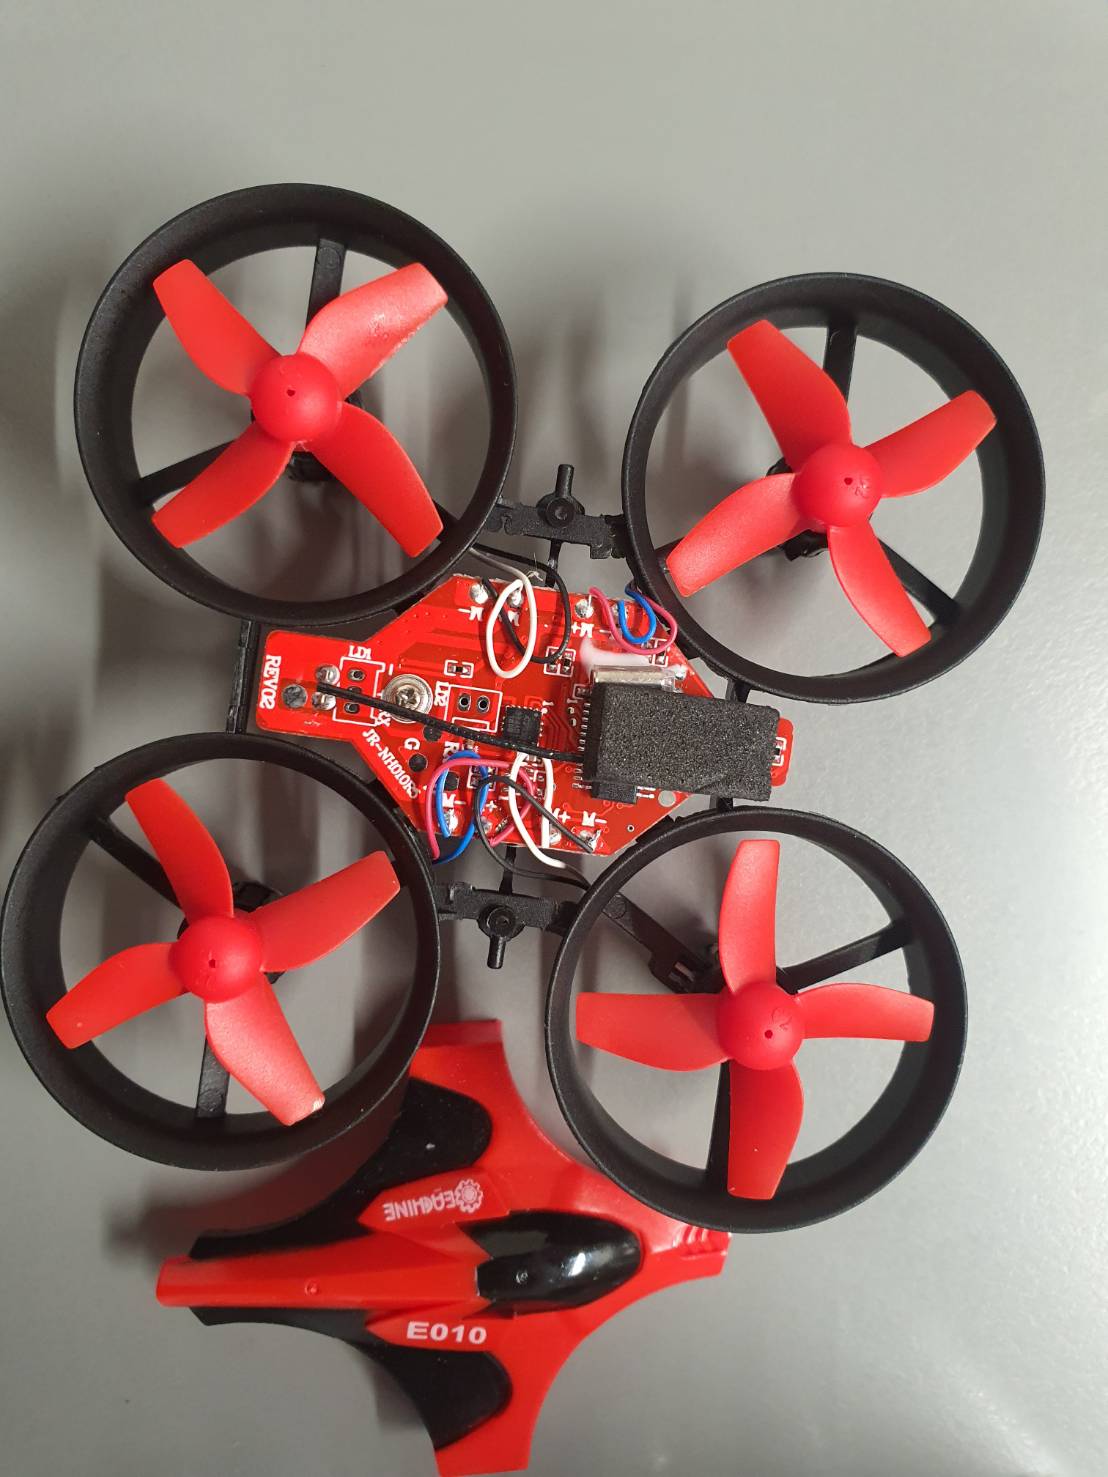 The Propellers of a Drone are crucial to success in Aerial Videography
